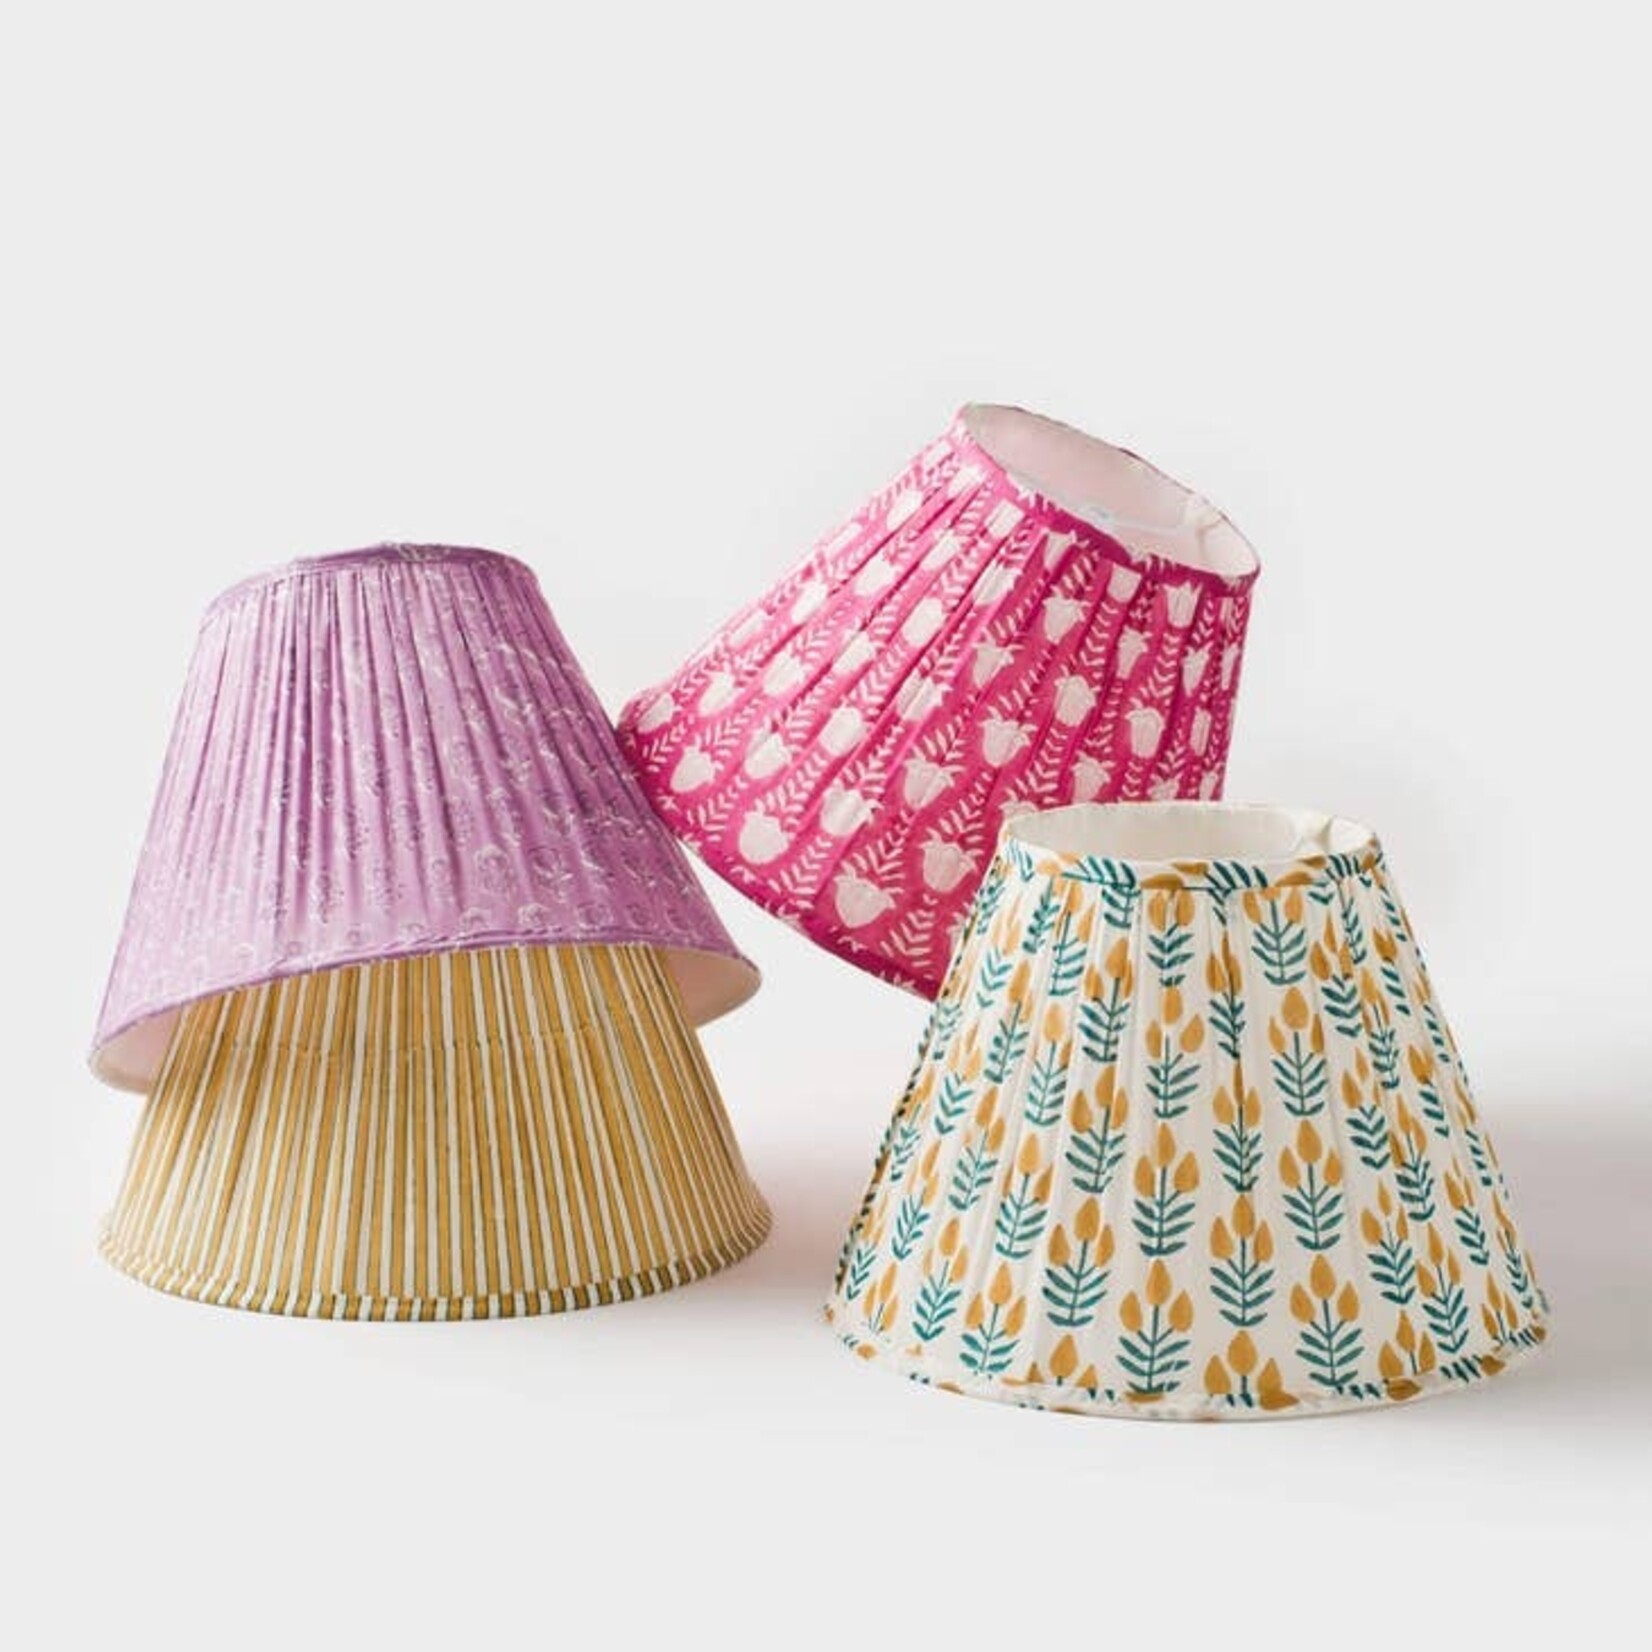 Meadow Gathered Floral Lampshade